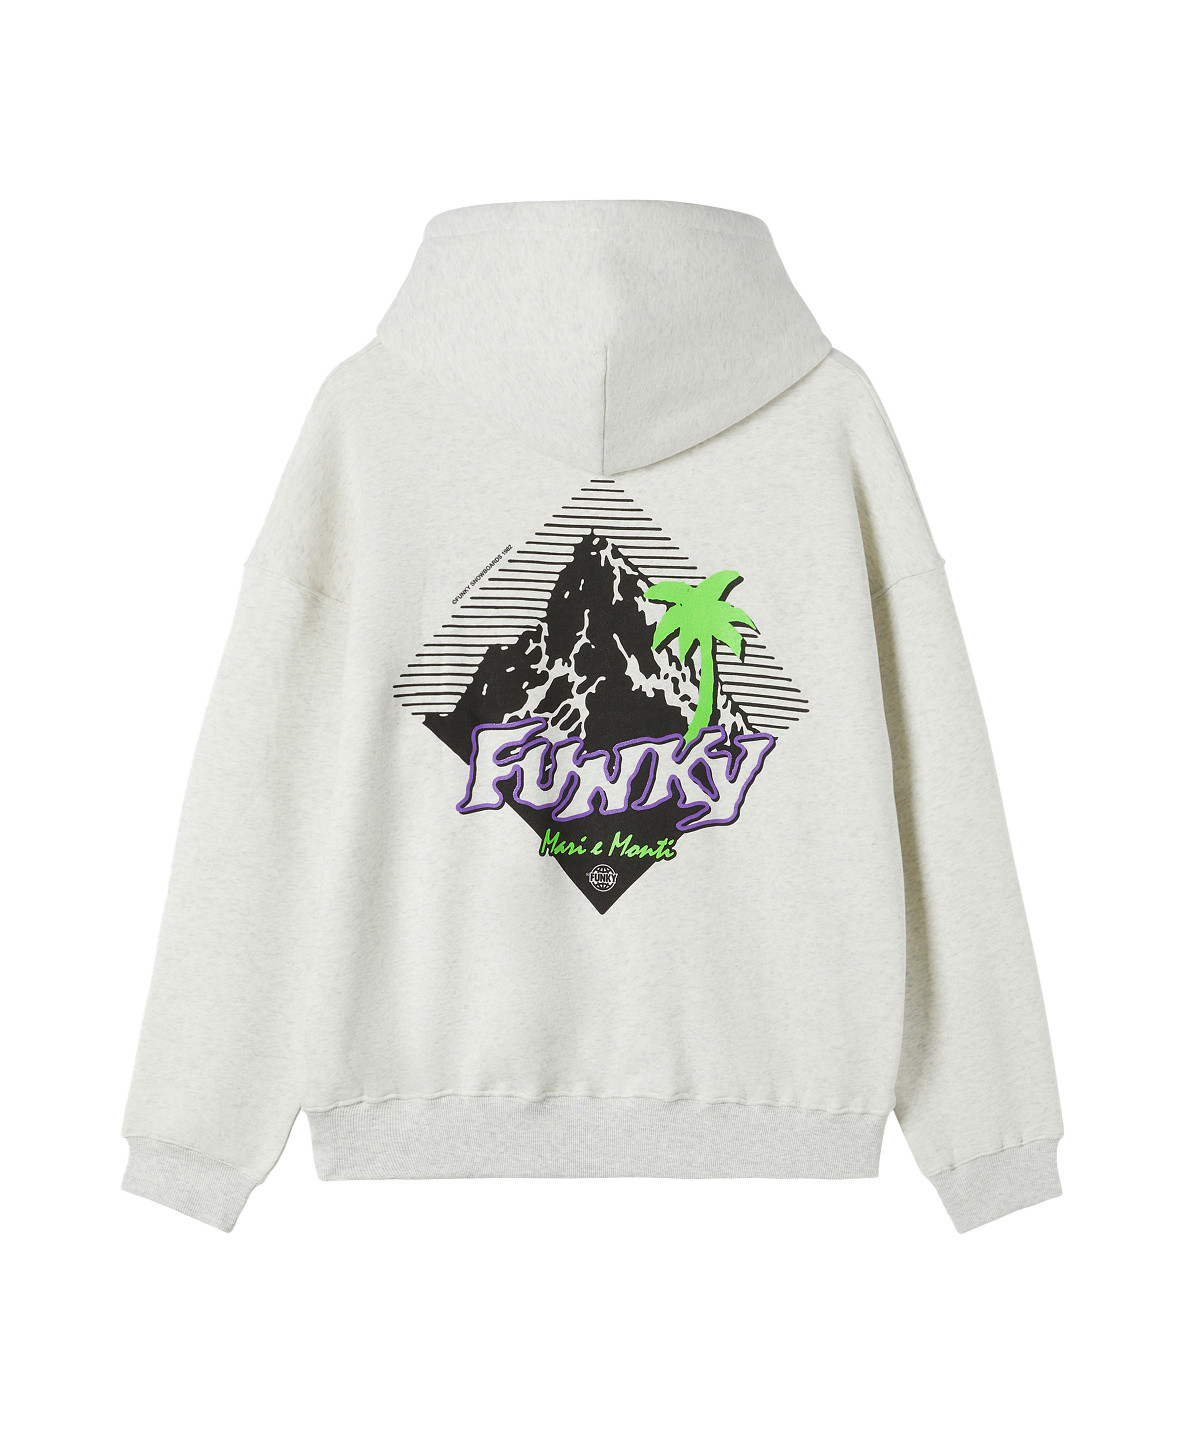 Funky - Hooded sweatshirt with sea and mountain print, Grey, large image number 1